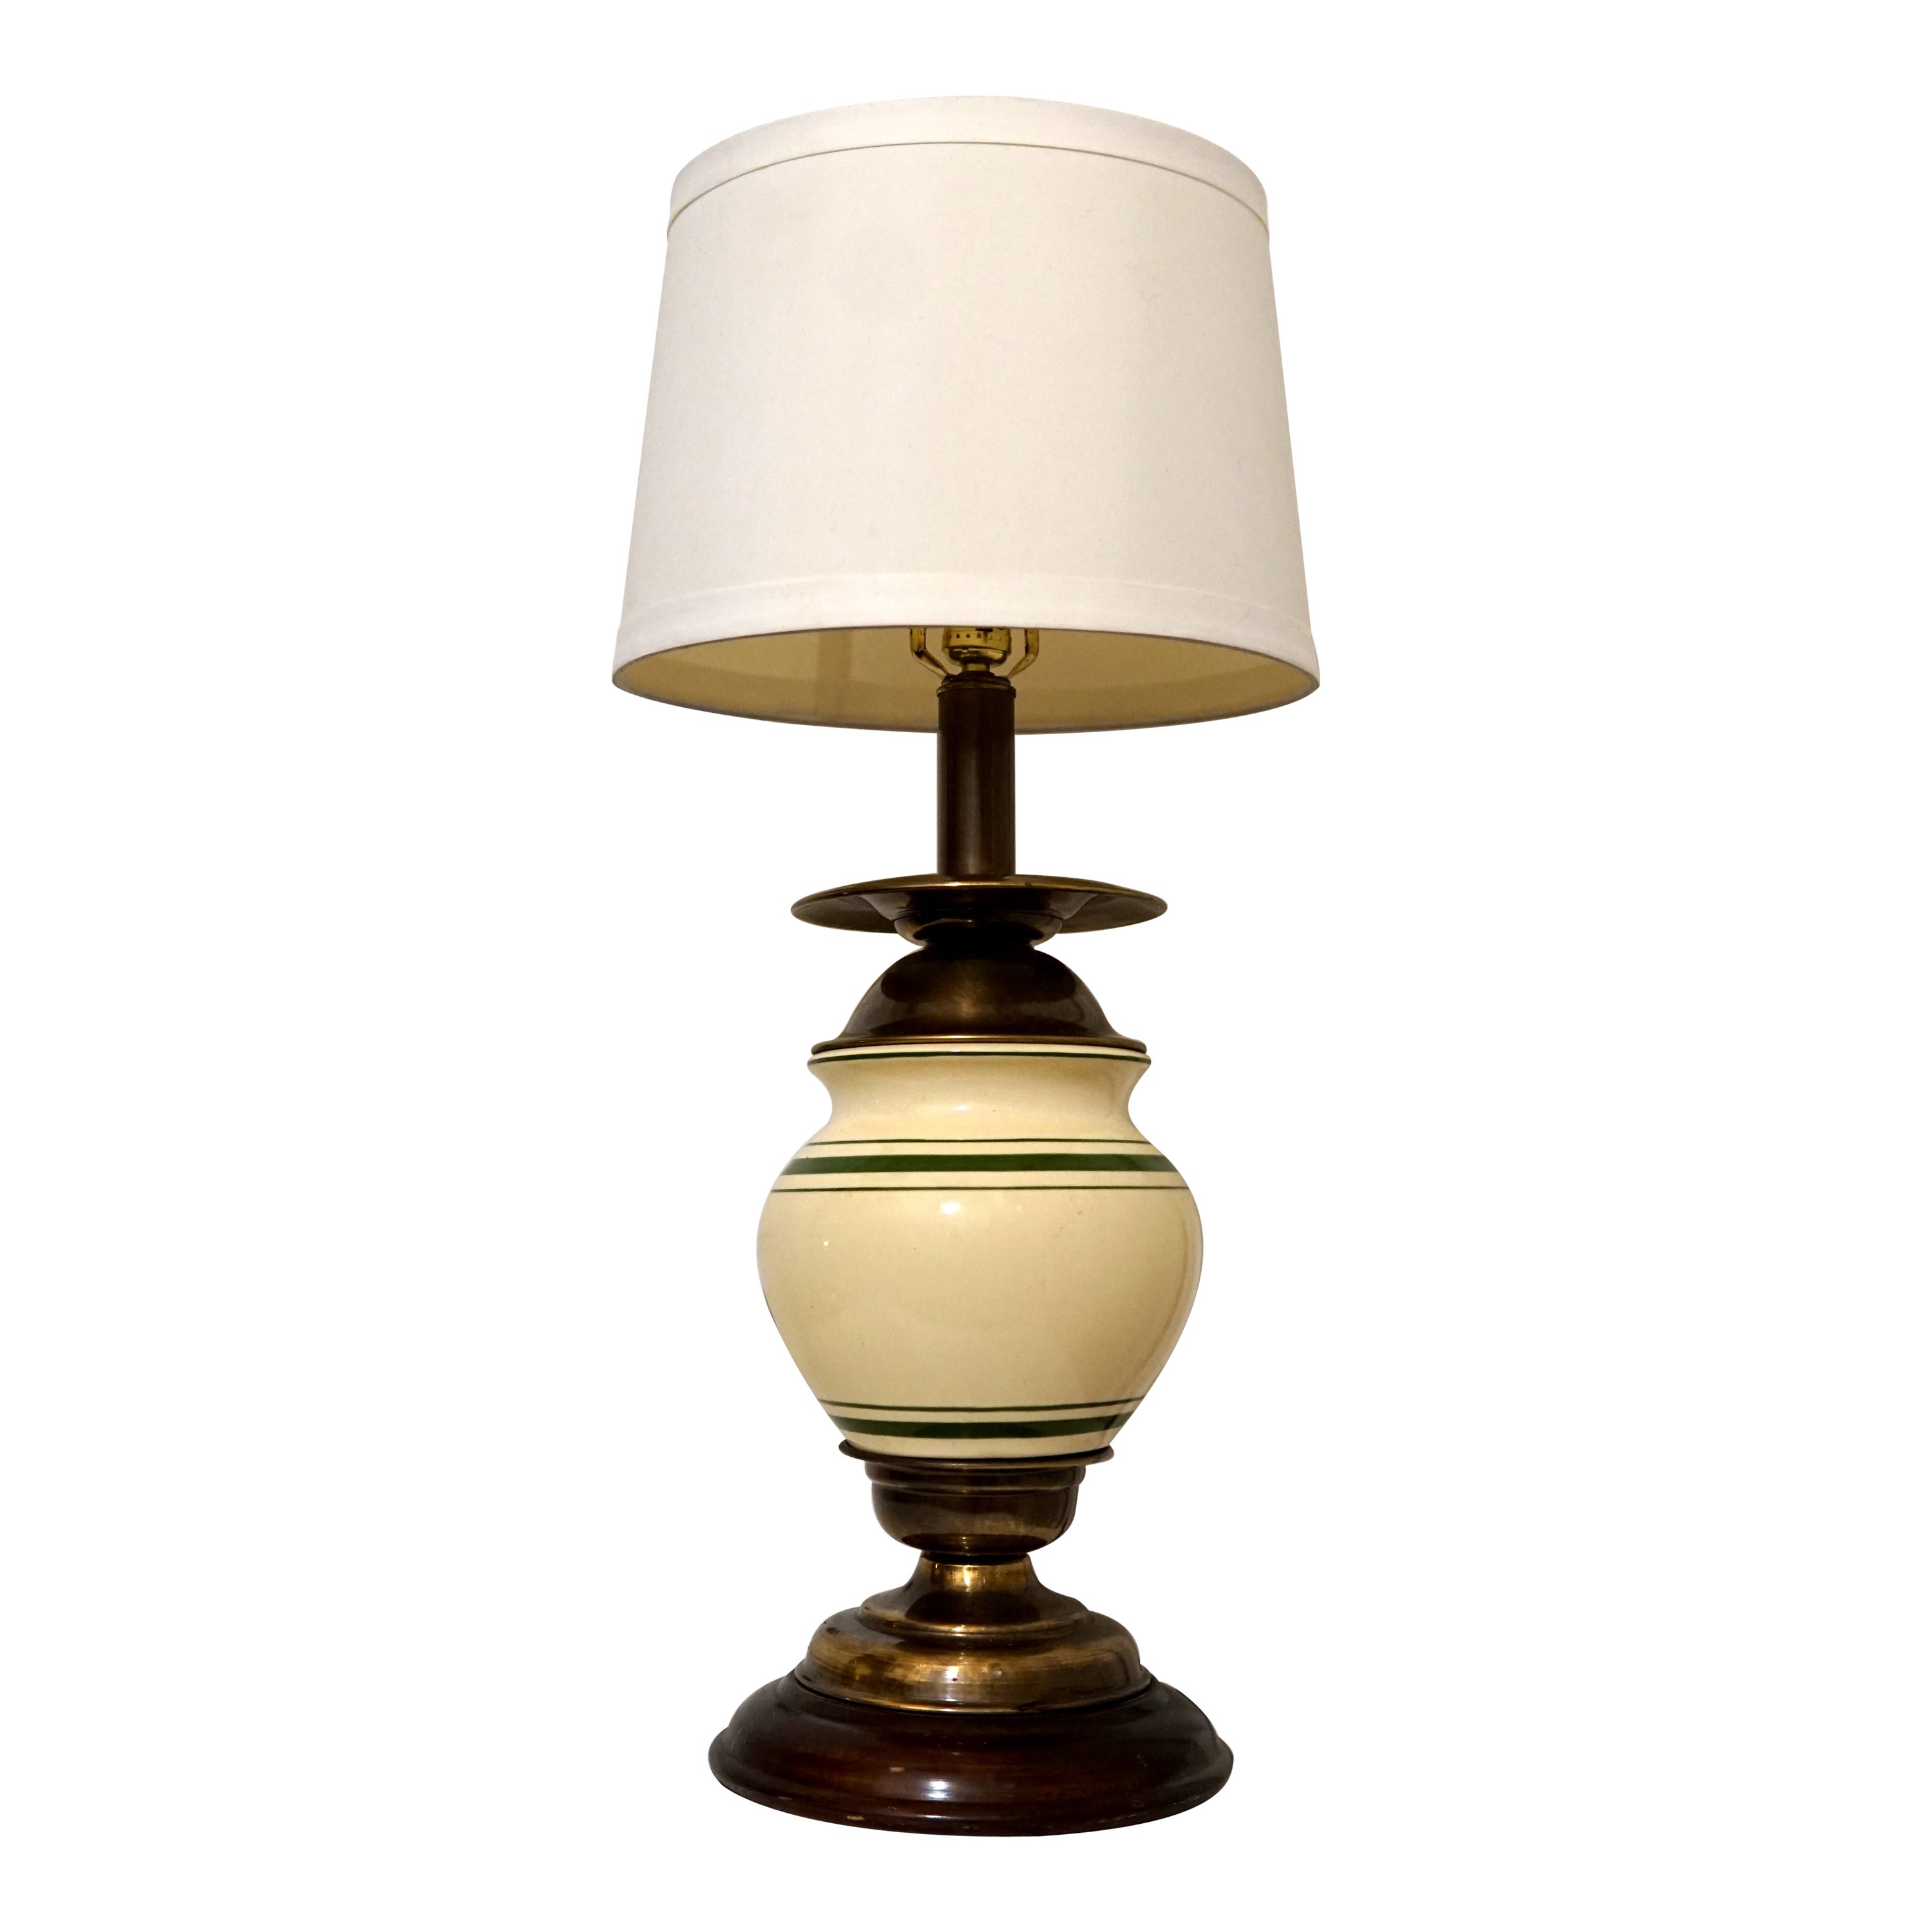 What is a buffet table lamp?